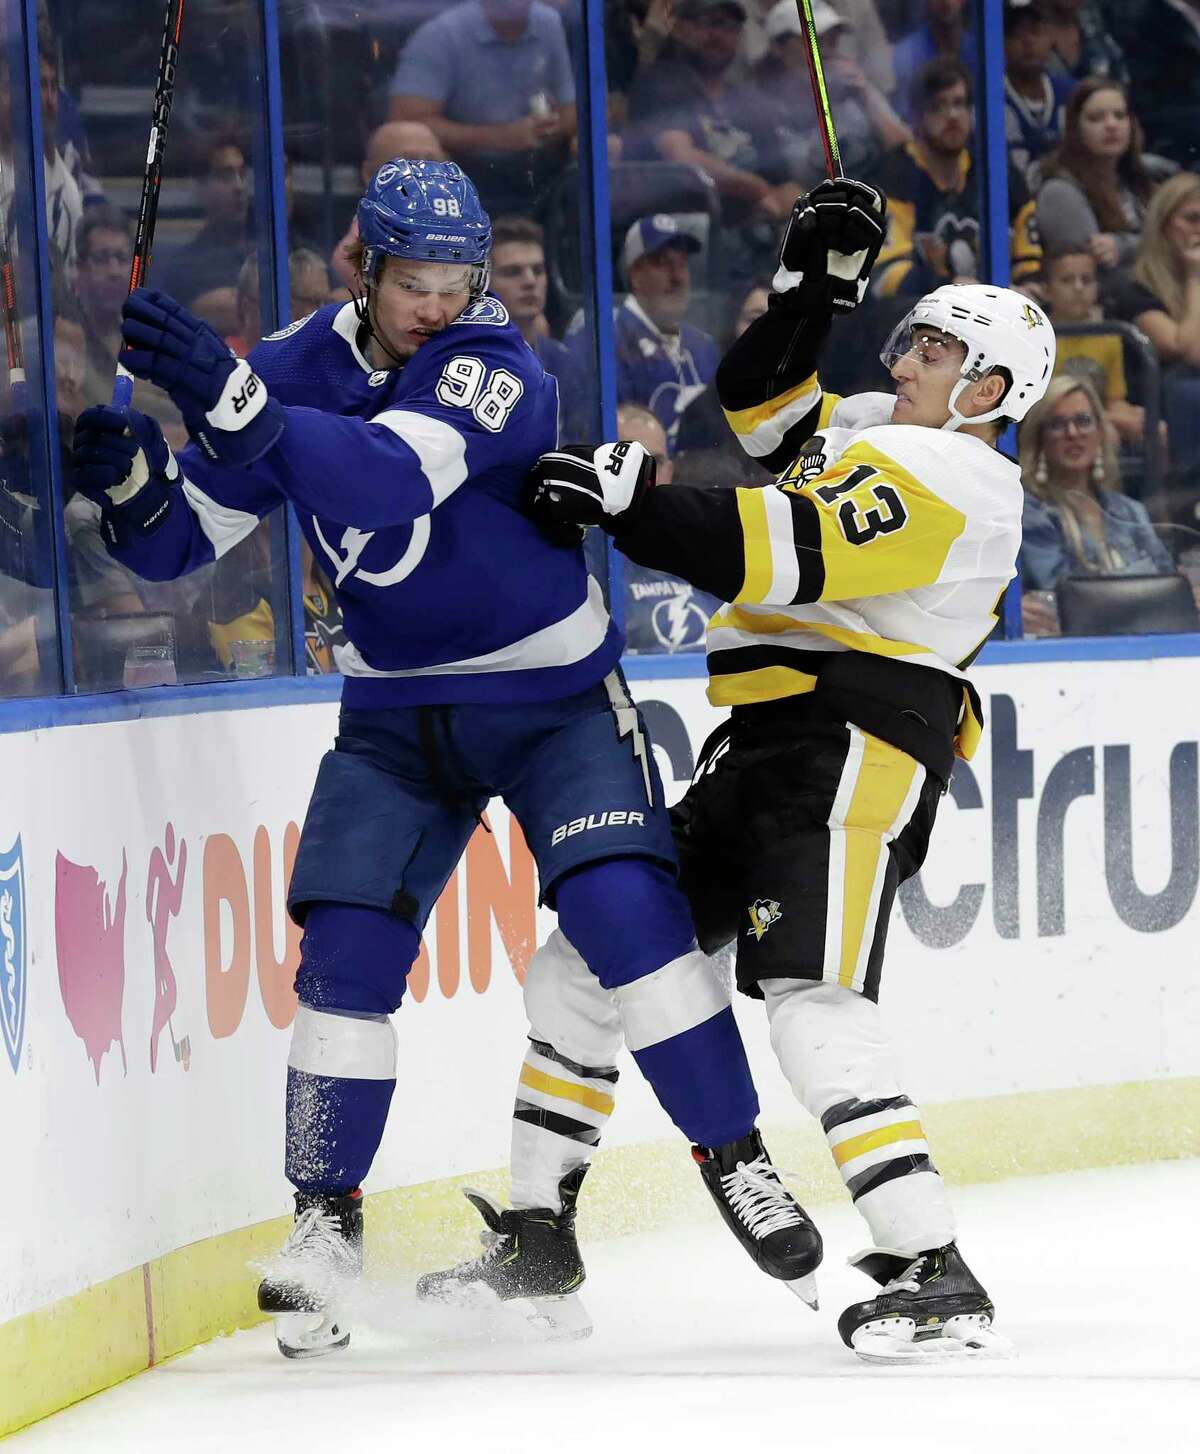 Pittsburgh Penguins left wing Brandon Tanev (13) checks Tampa Bay Lightning defenseman Mikhail Sergachev (98) into the boards during the first period of an NHL hockey game Wednesday, Oct. 23, 2019, in Tampa, Fla. (AP Photo/Chris O'Meara)